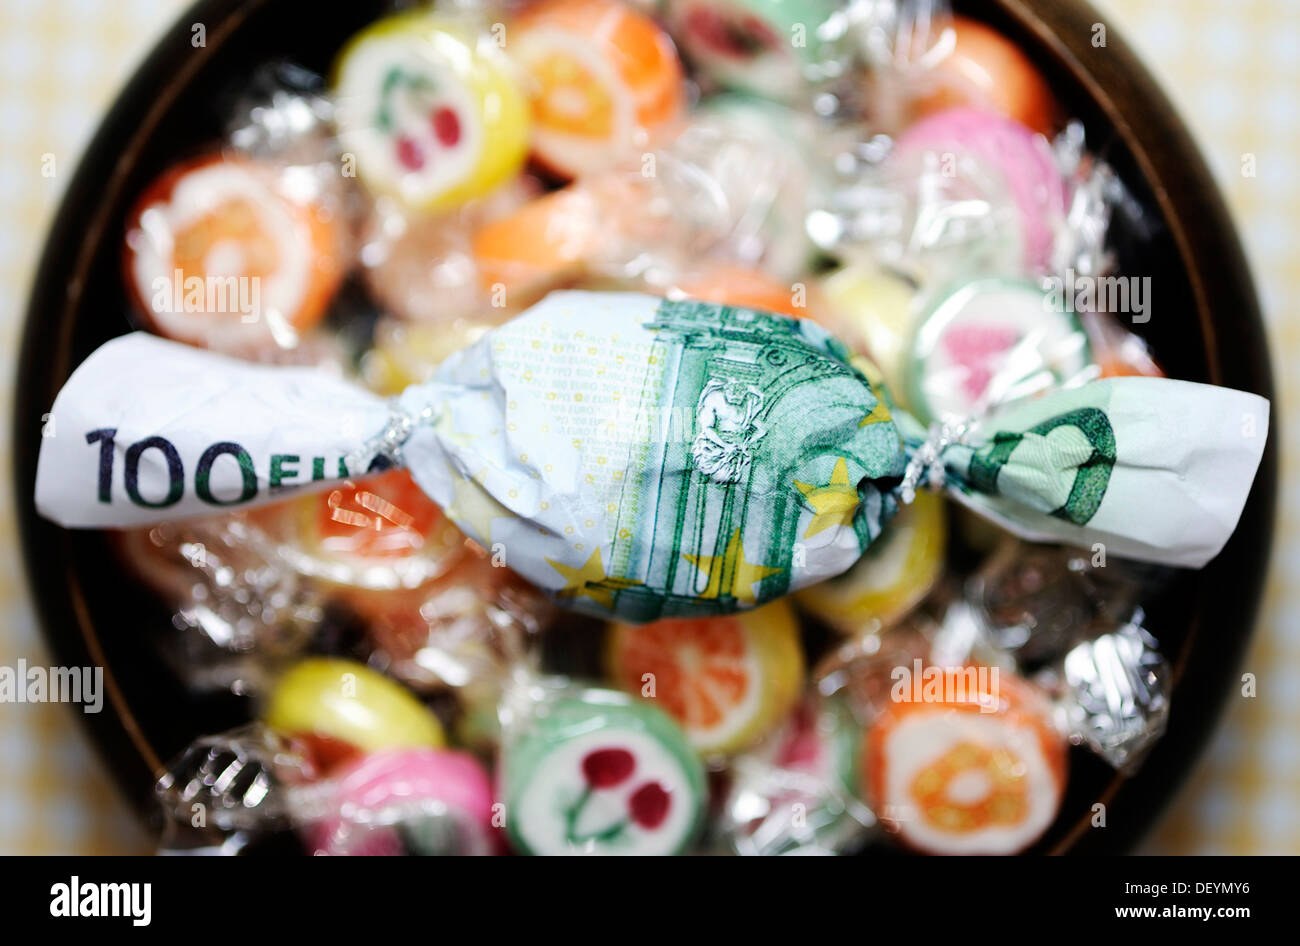 Candy wrapped in a hundred-euro bill, symbolic image for premiums Stock Photo